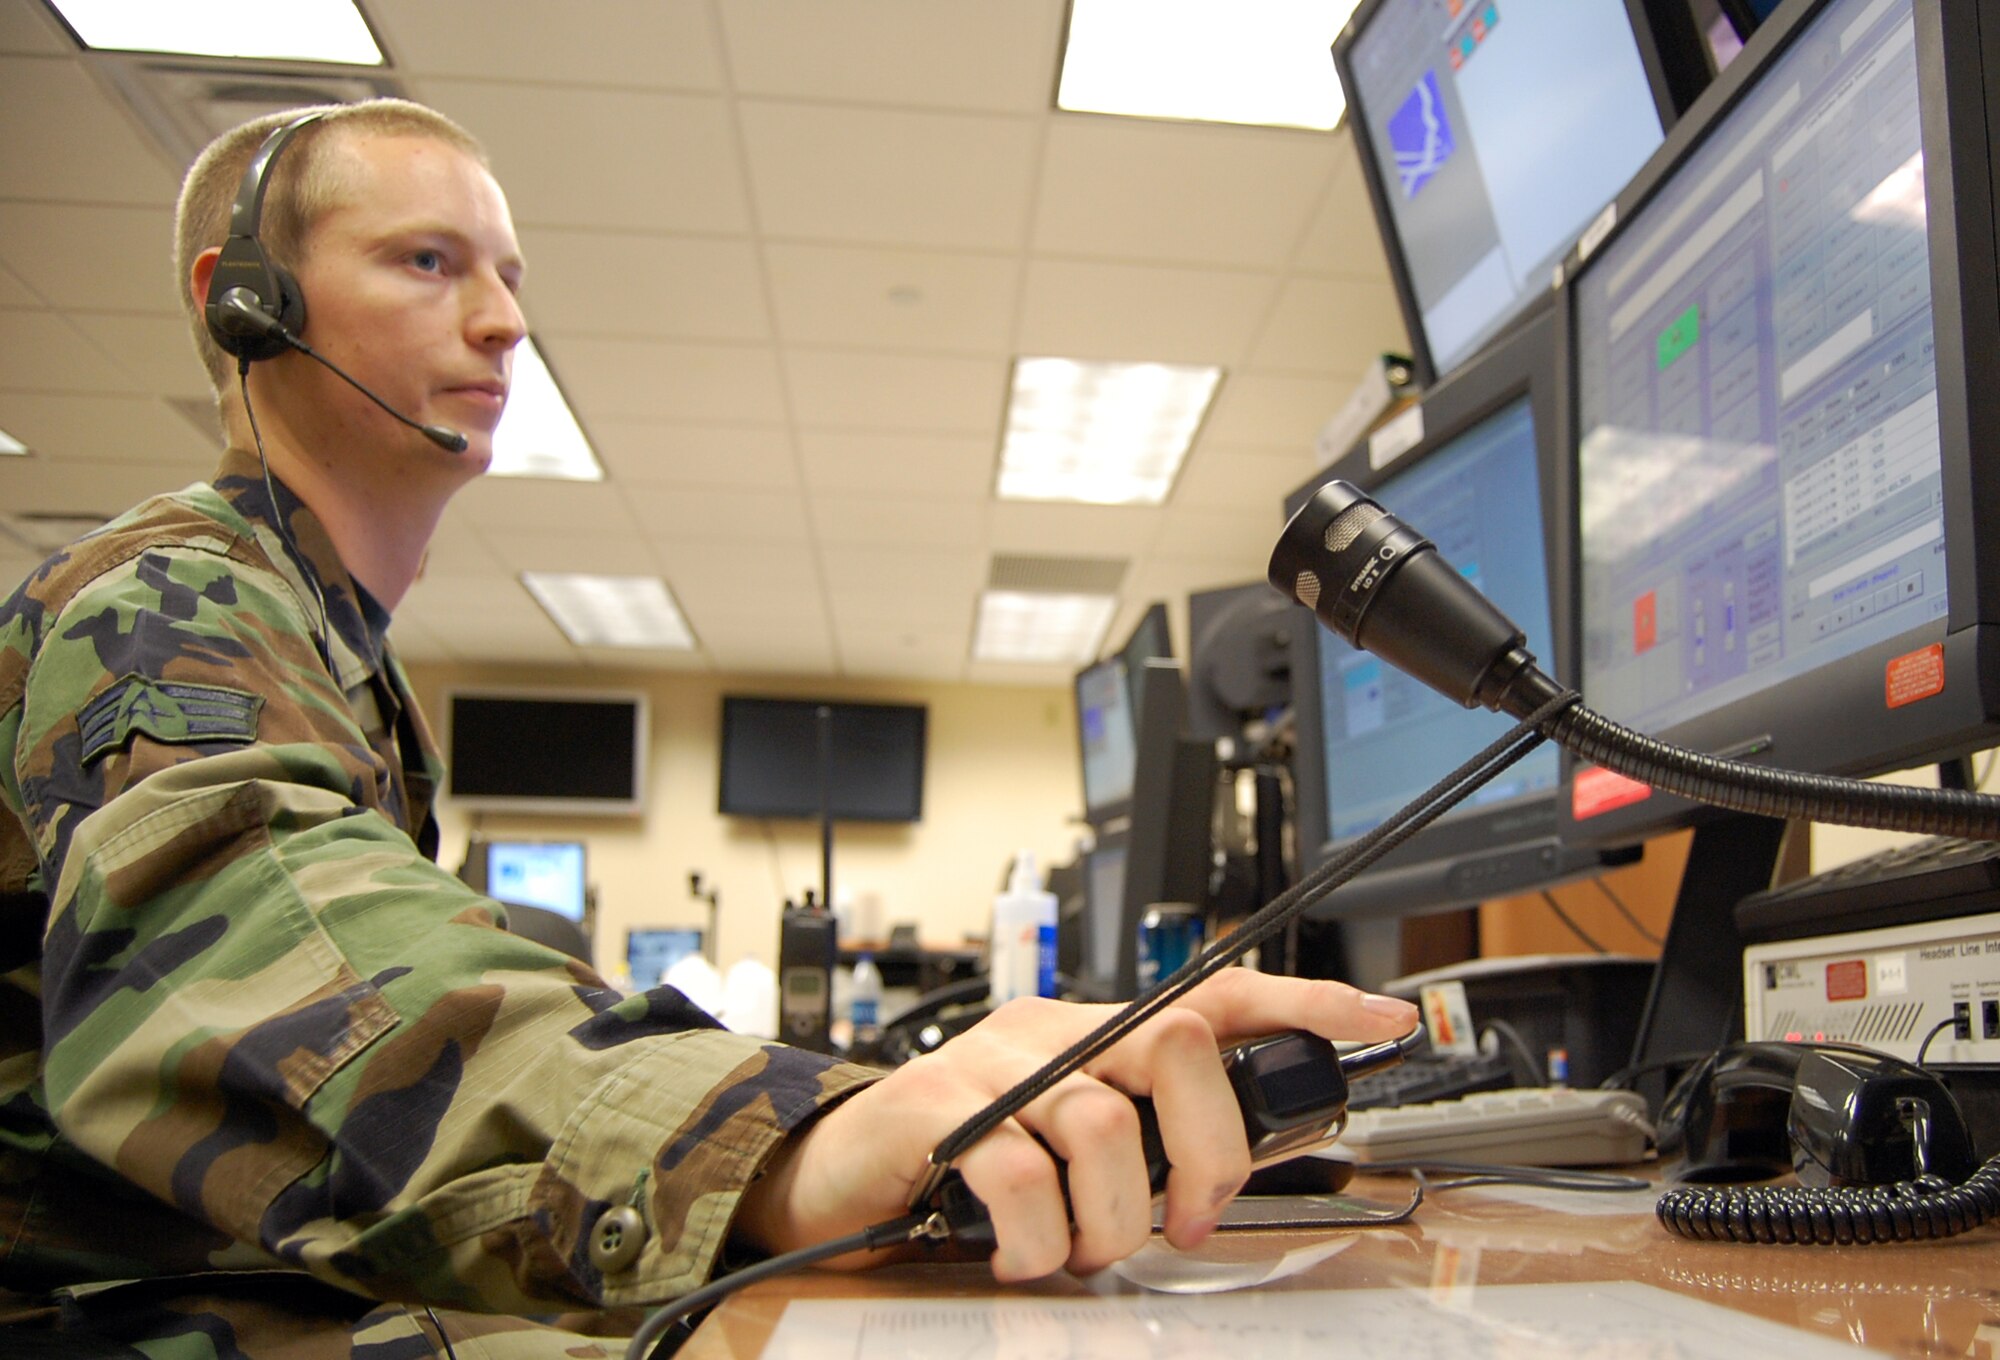 LAUGHLIN AIR FORCE BASE, Texas – Senior Airman Steven Featherston, 47th Installation Support Squadron, monitors emergency communications in the 47th Flying Training Wing Command Post’s Alarm Room here Sept. 24.  During exercises, agencies at every corner of the base participate in order to train as realistically as possible.  (U.S. Air Force photo by Staff Sgt Austin M. May)